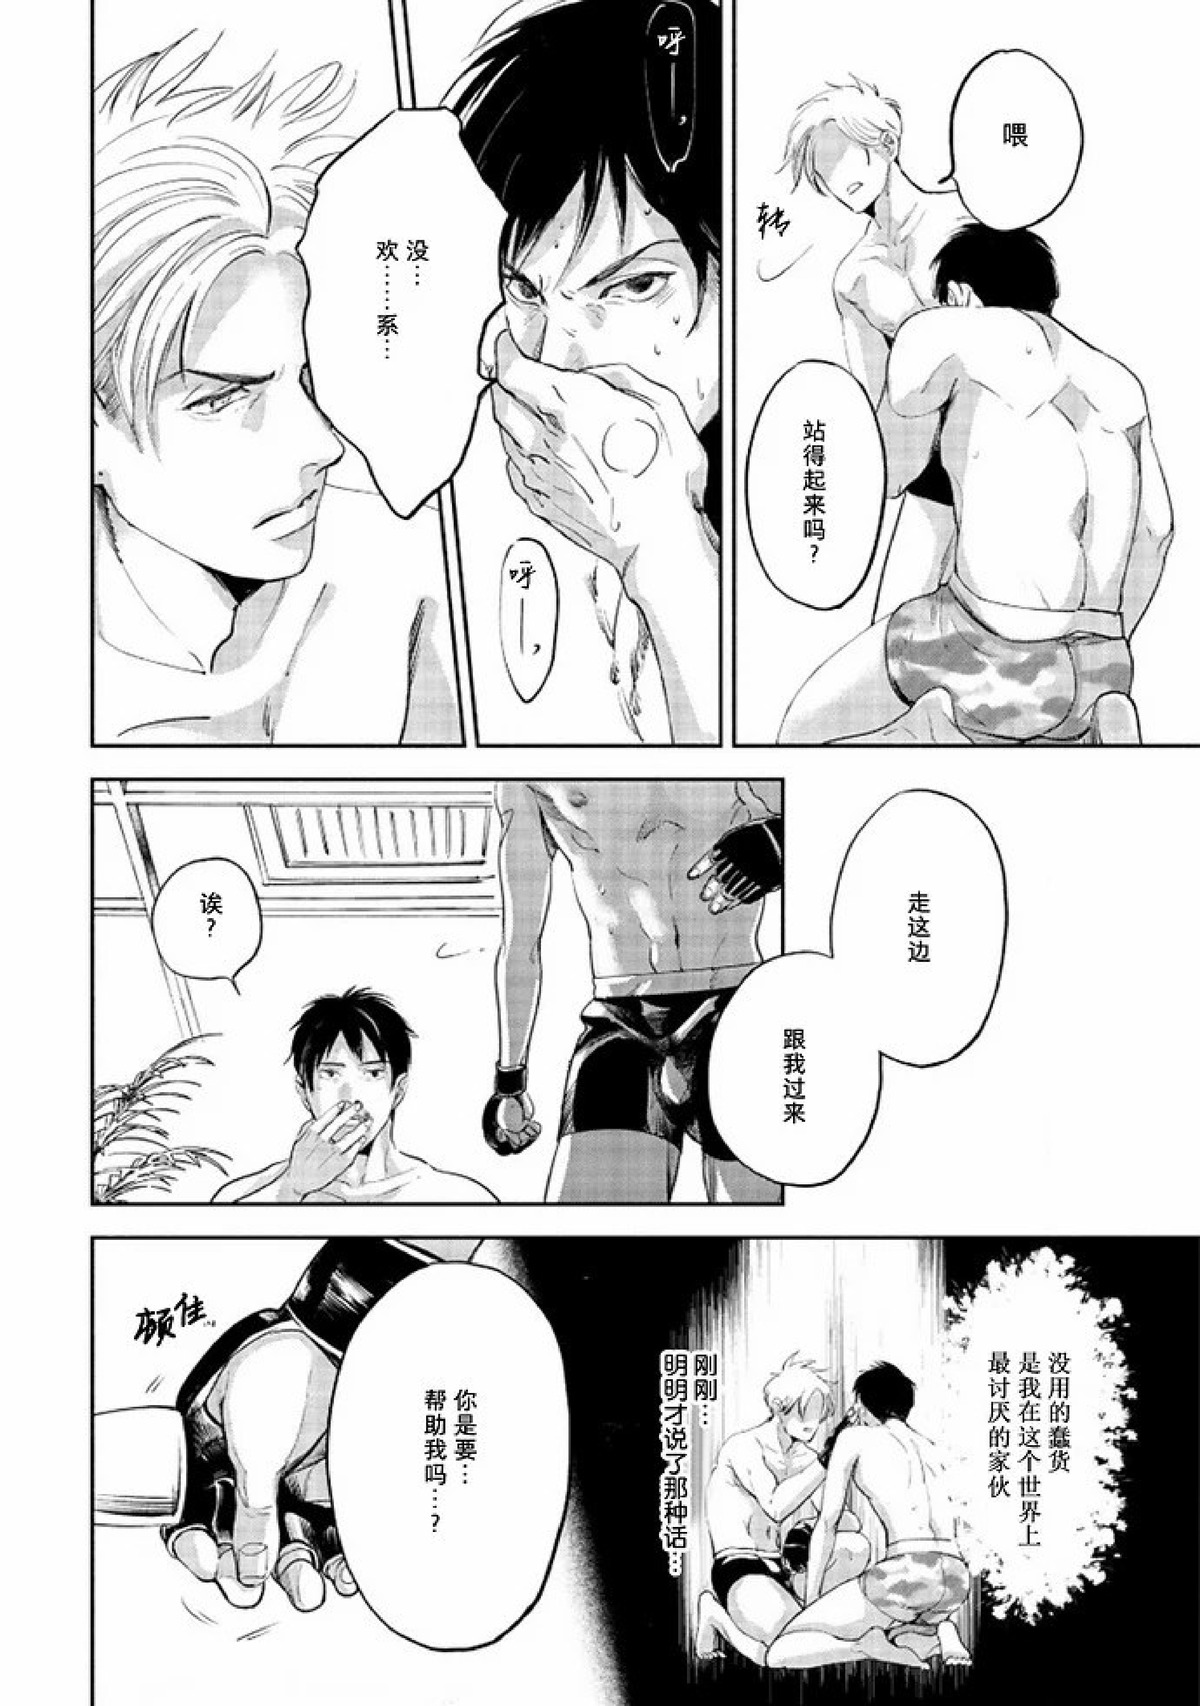 【Two sides of the same coin[耽美]】漫画-（上卷01-02）章节漫画下拉式图片-72.jpg